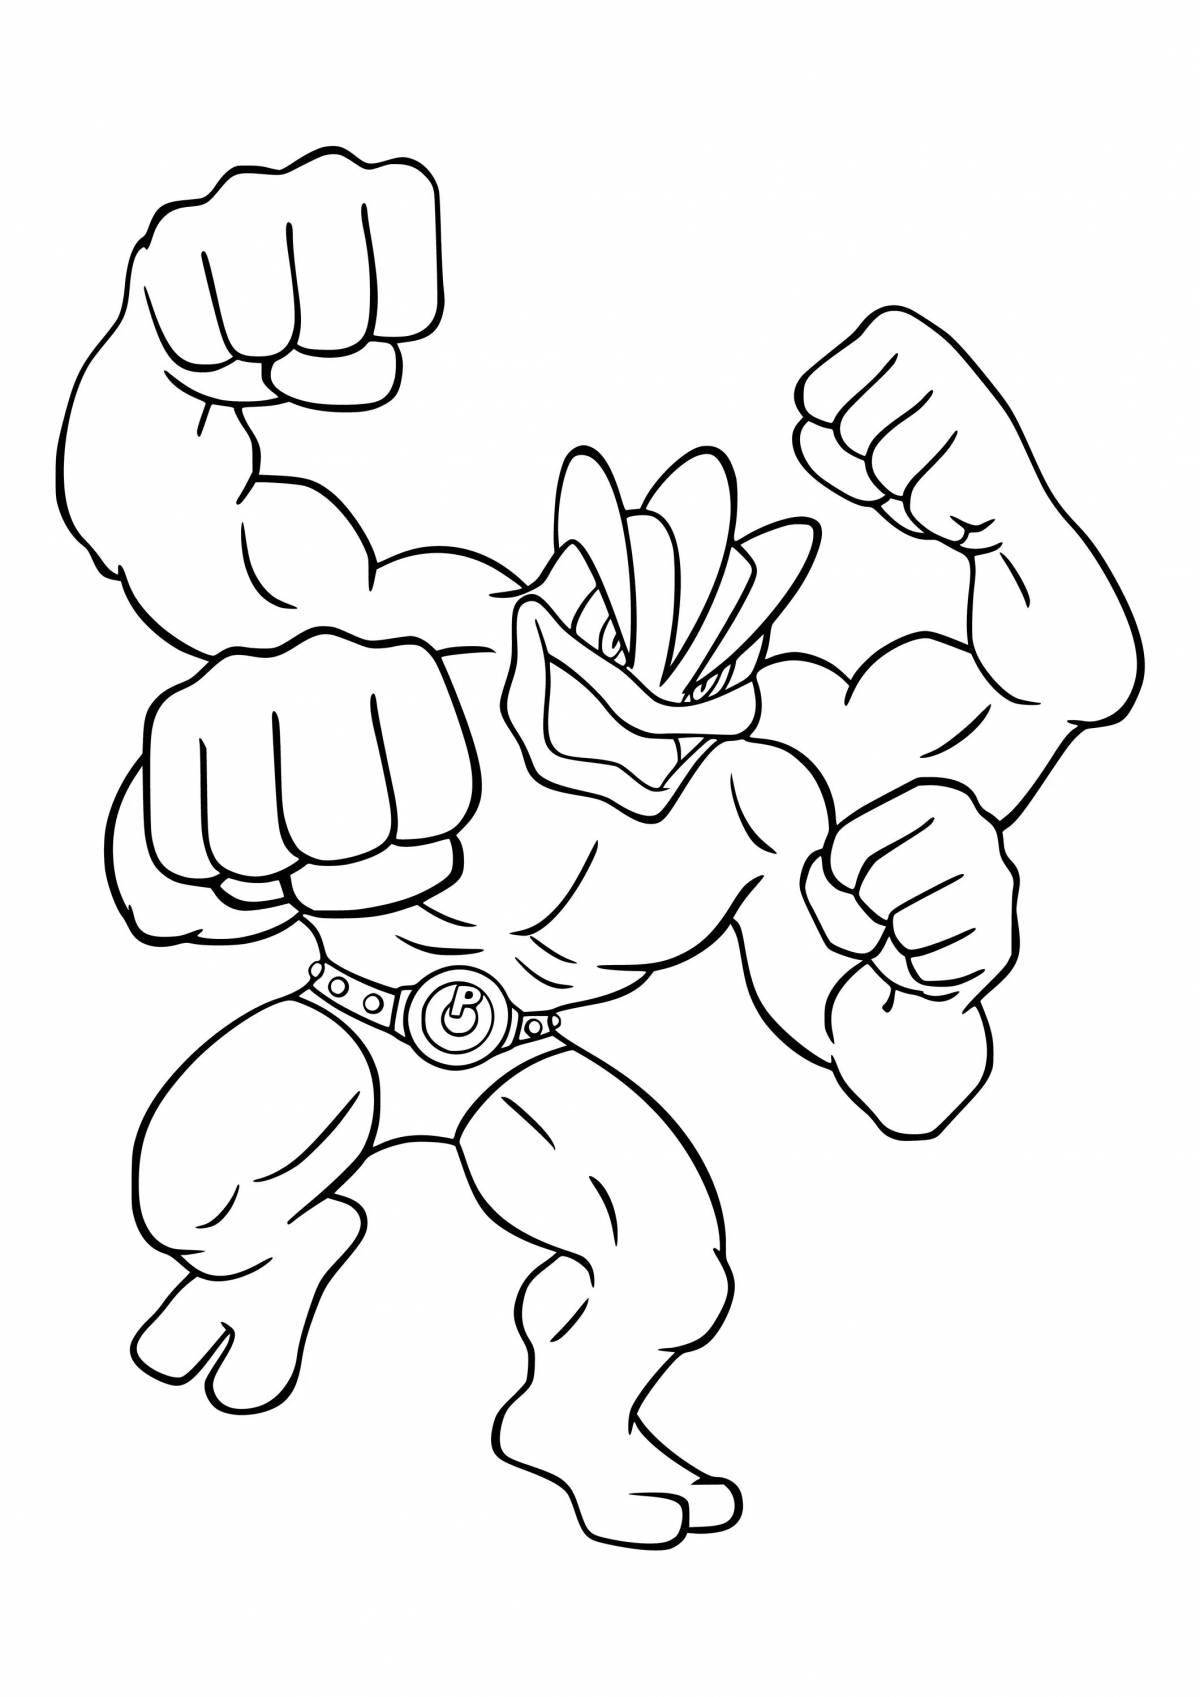 Funny fujitsu heroes coloring pages